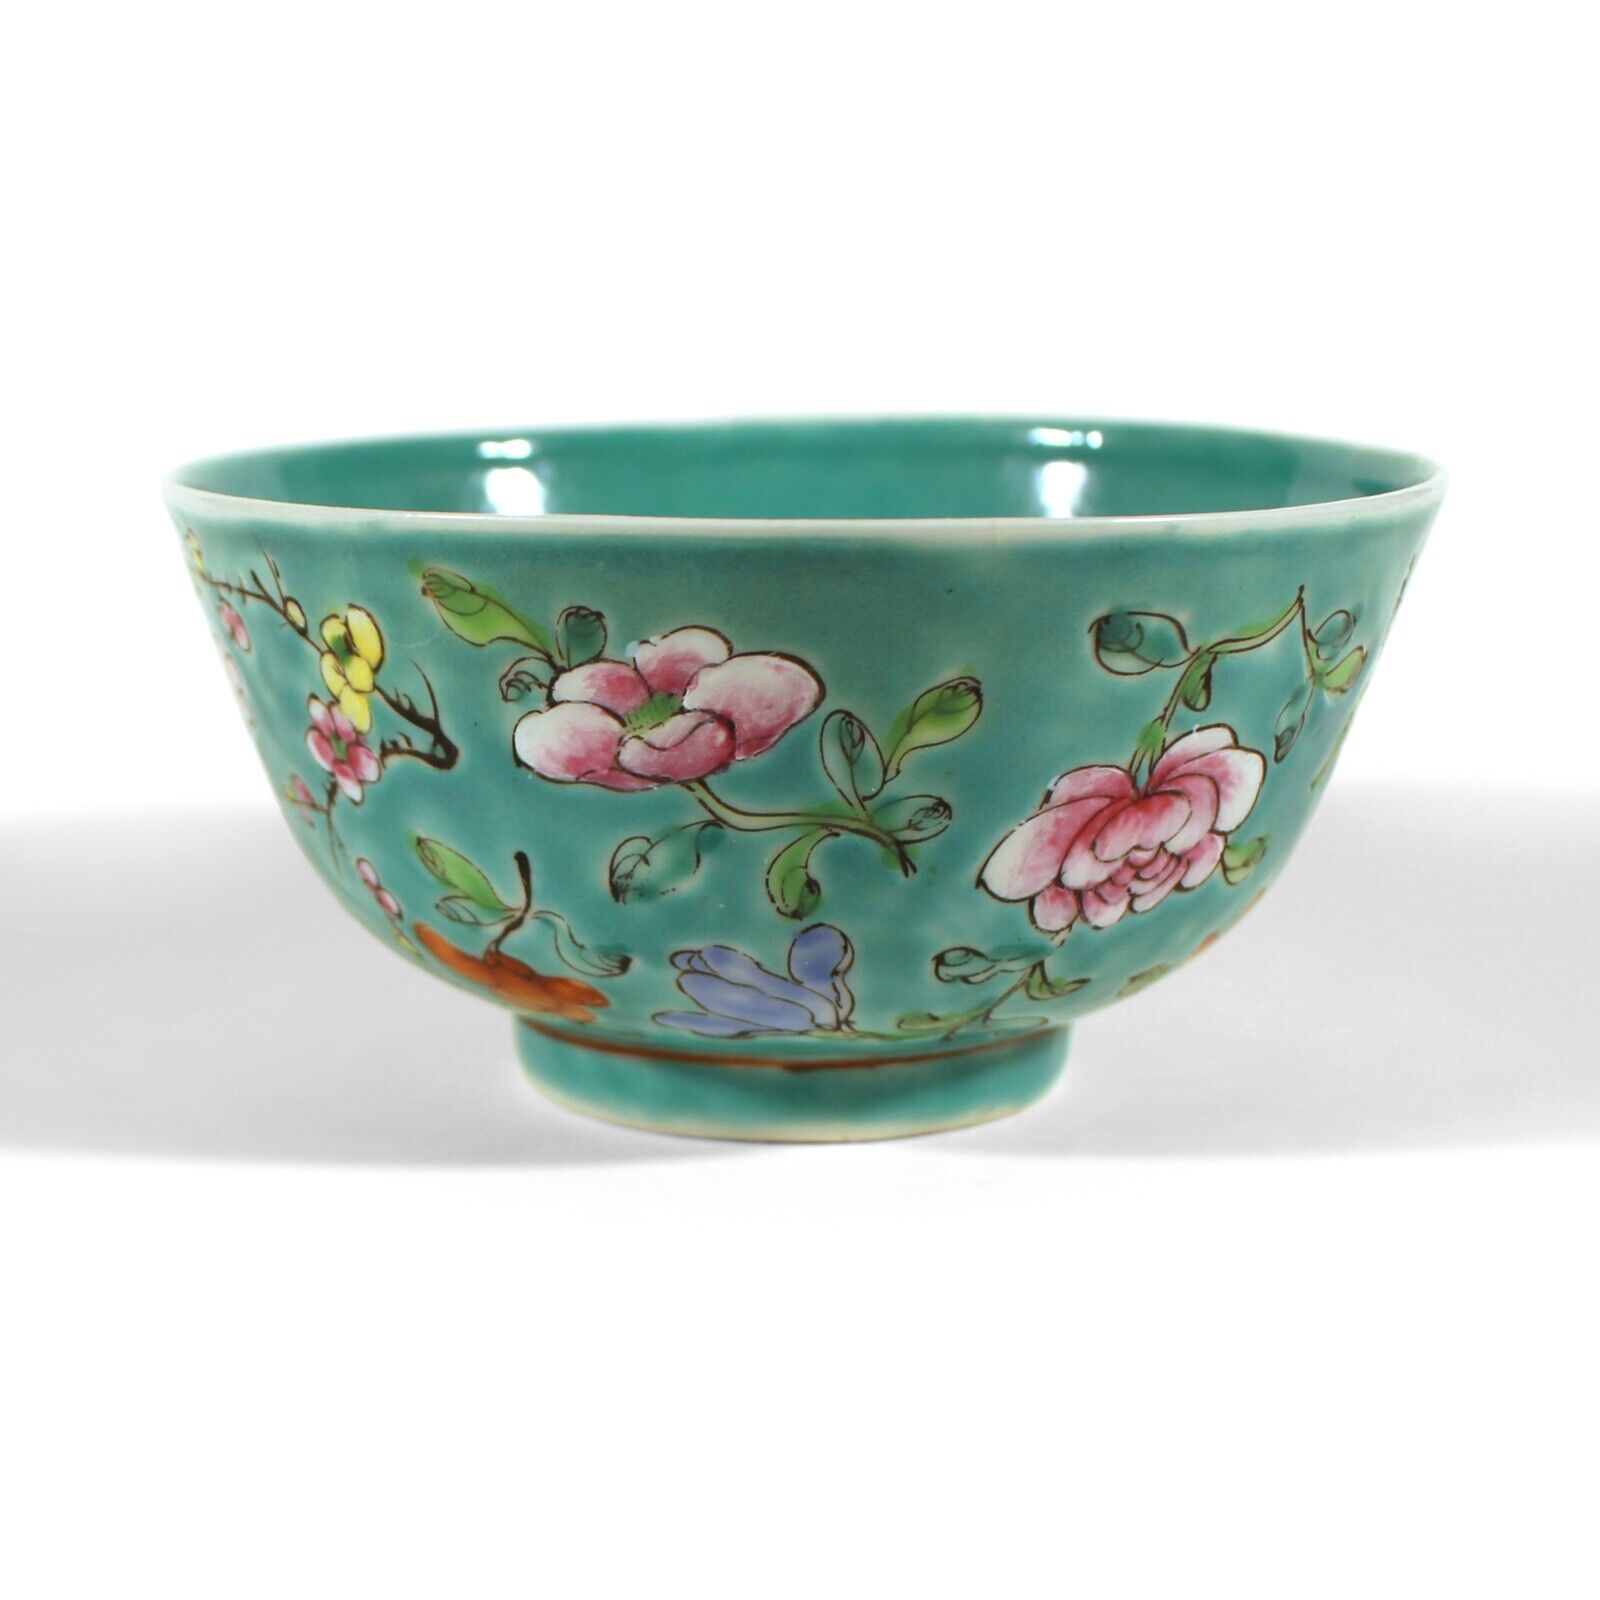 OLD CHINESE FAMILLE ROSE PORCELAIN FOOTED BOWL ENAMELED FLOWERS TURQUOISE CHINA